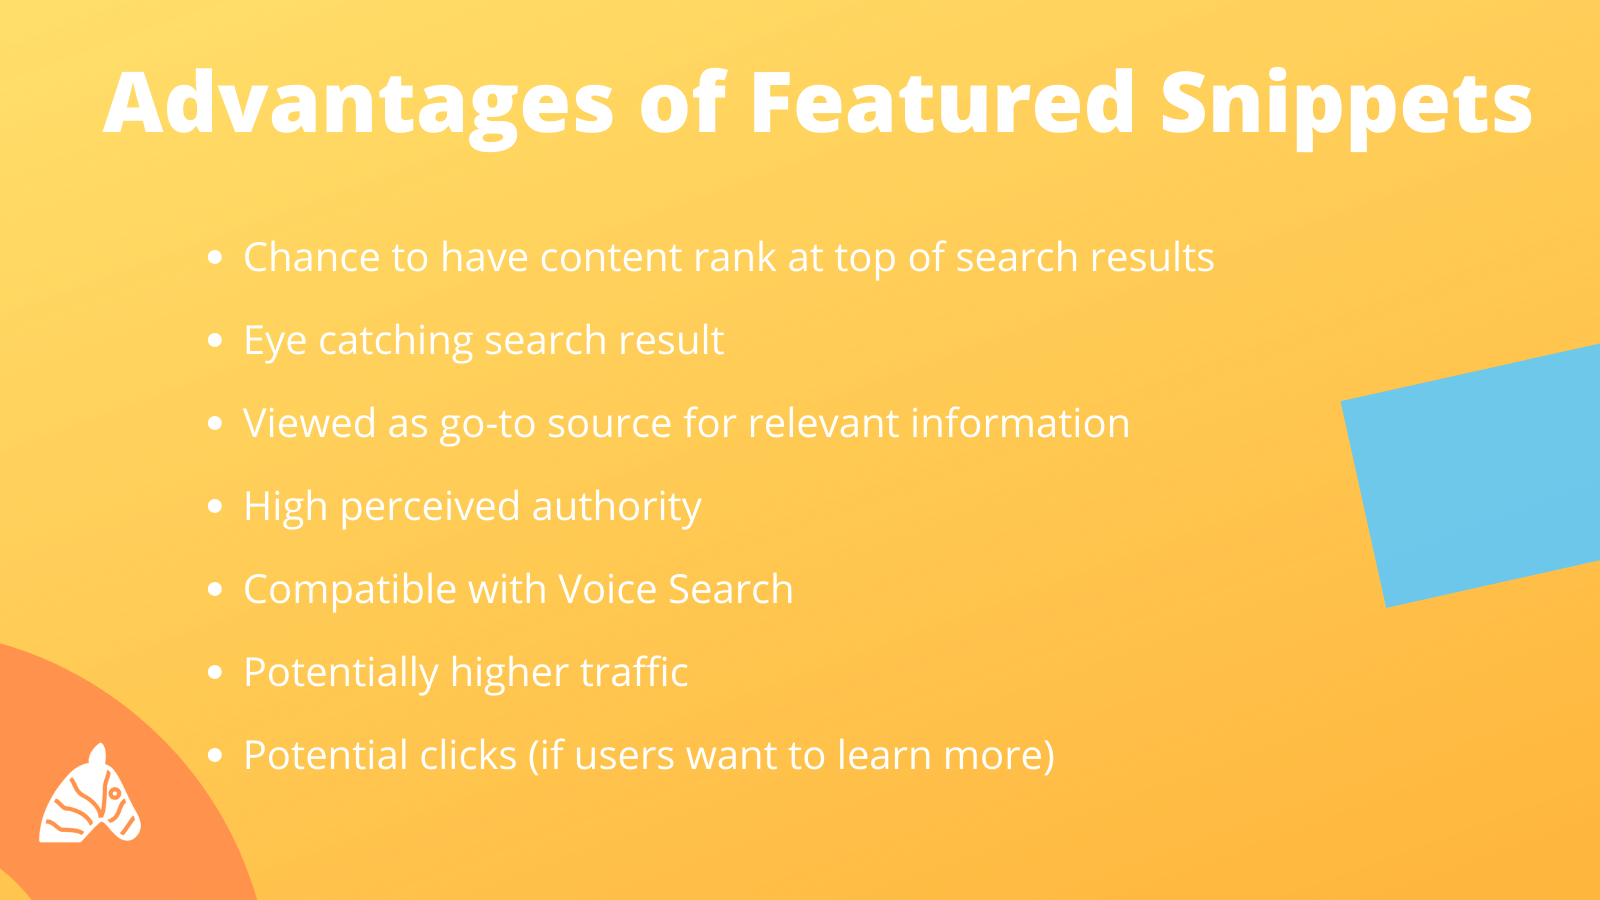 Advantages of Featured Snippets over position 1 on Google